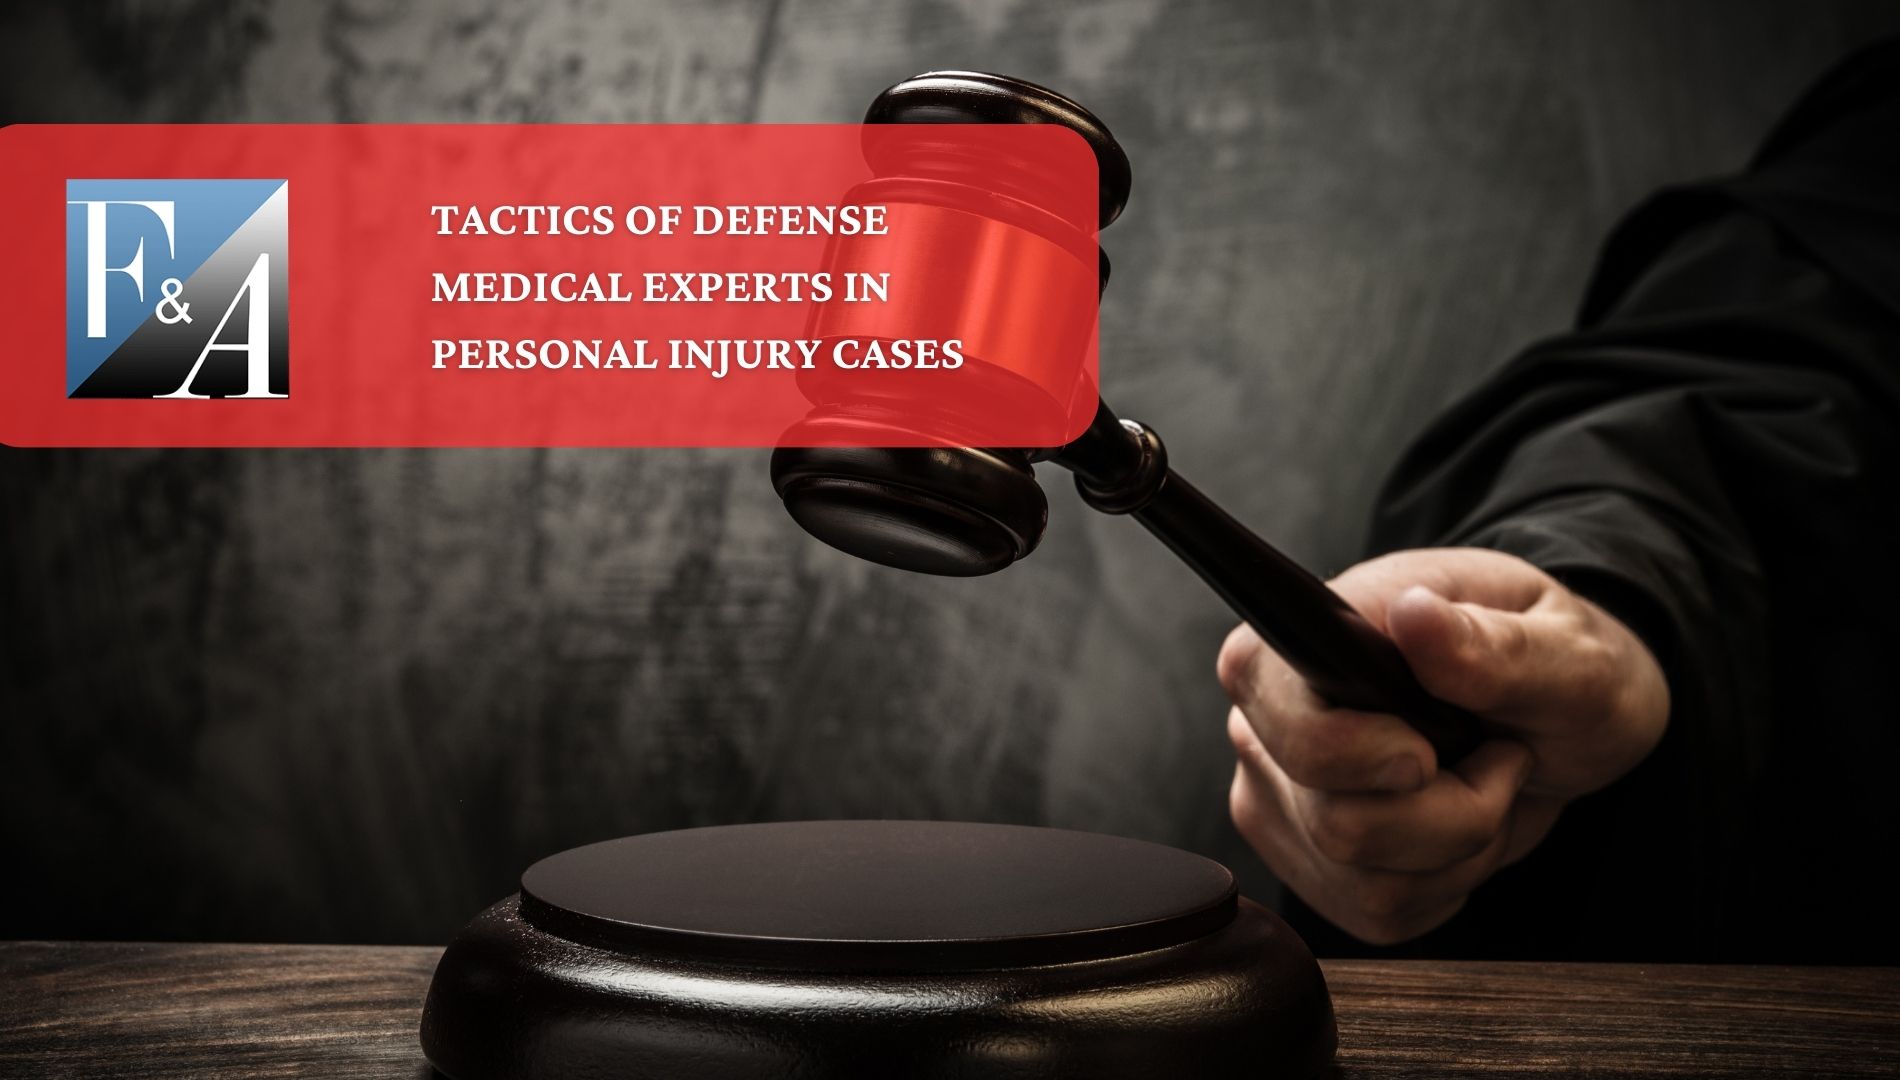 defence-tactic-personal-injury